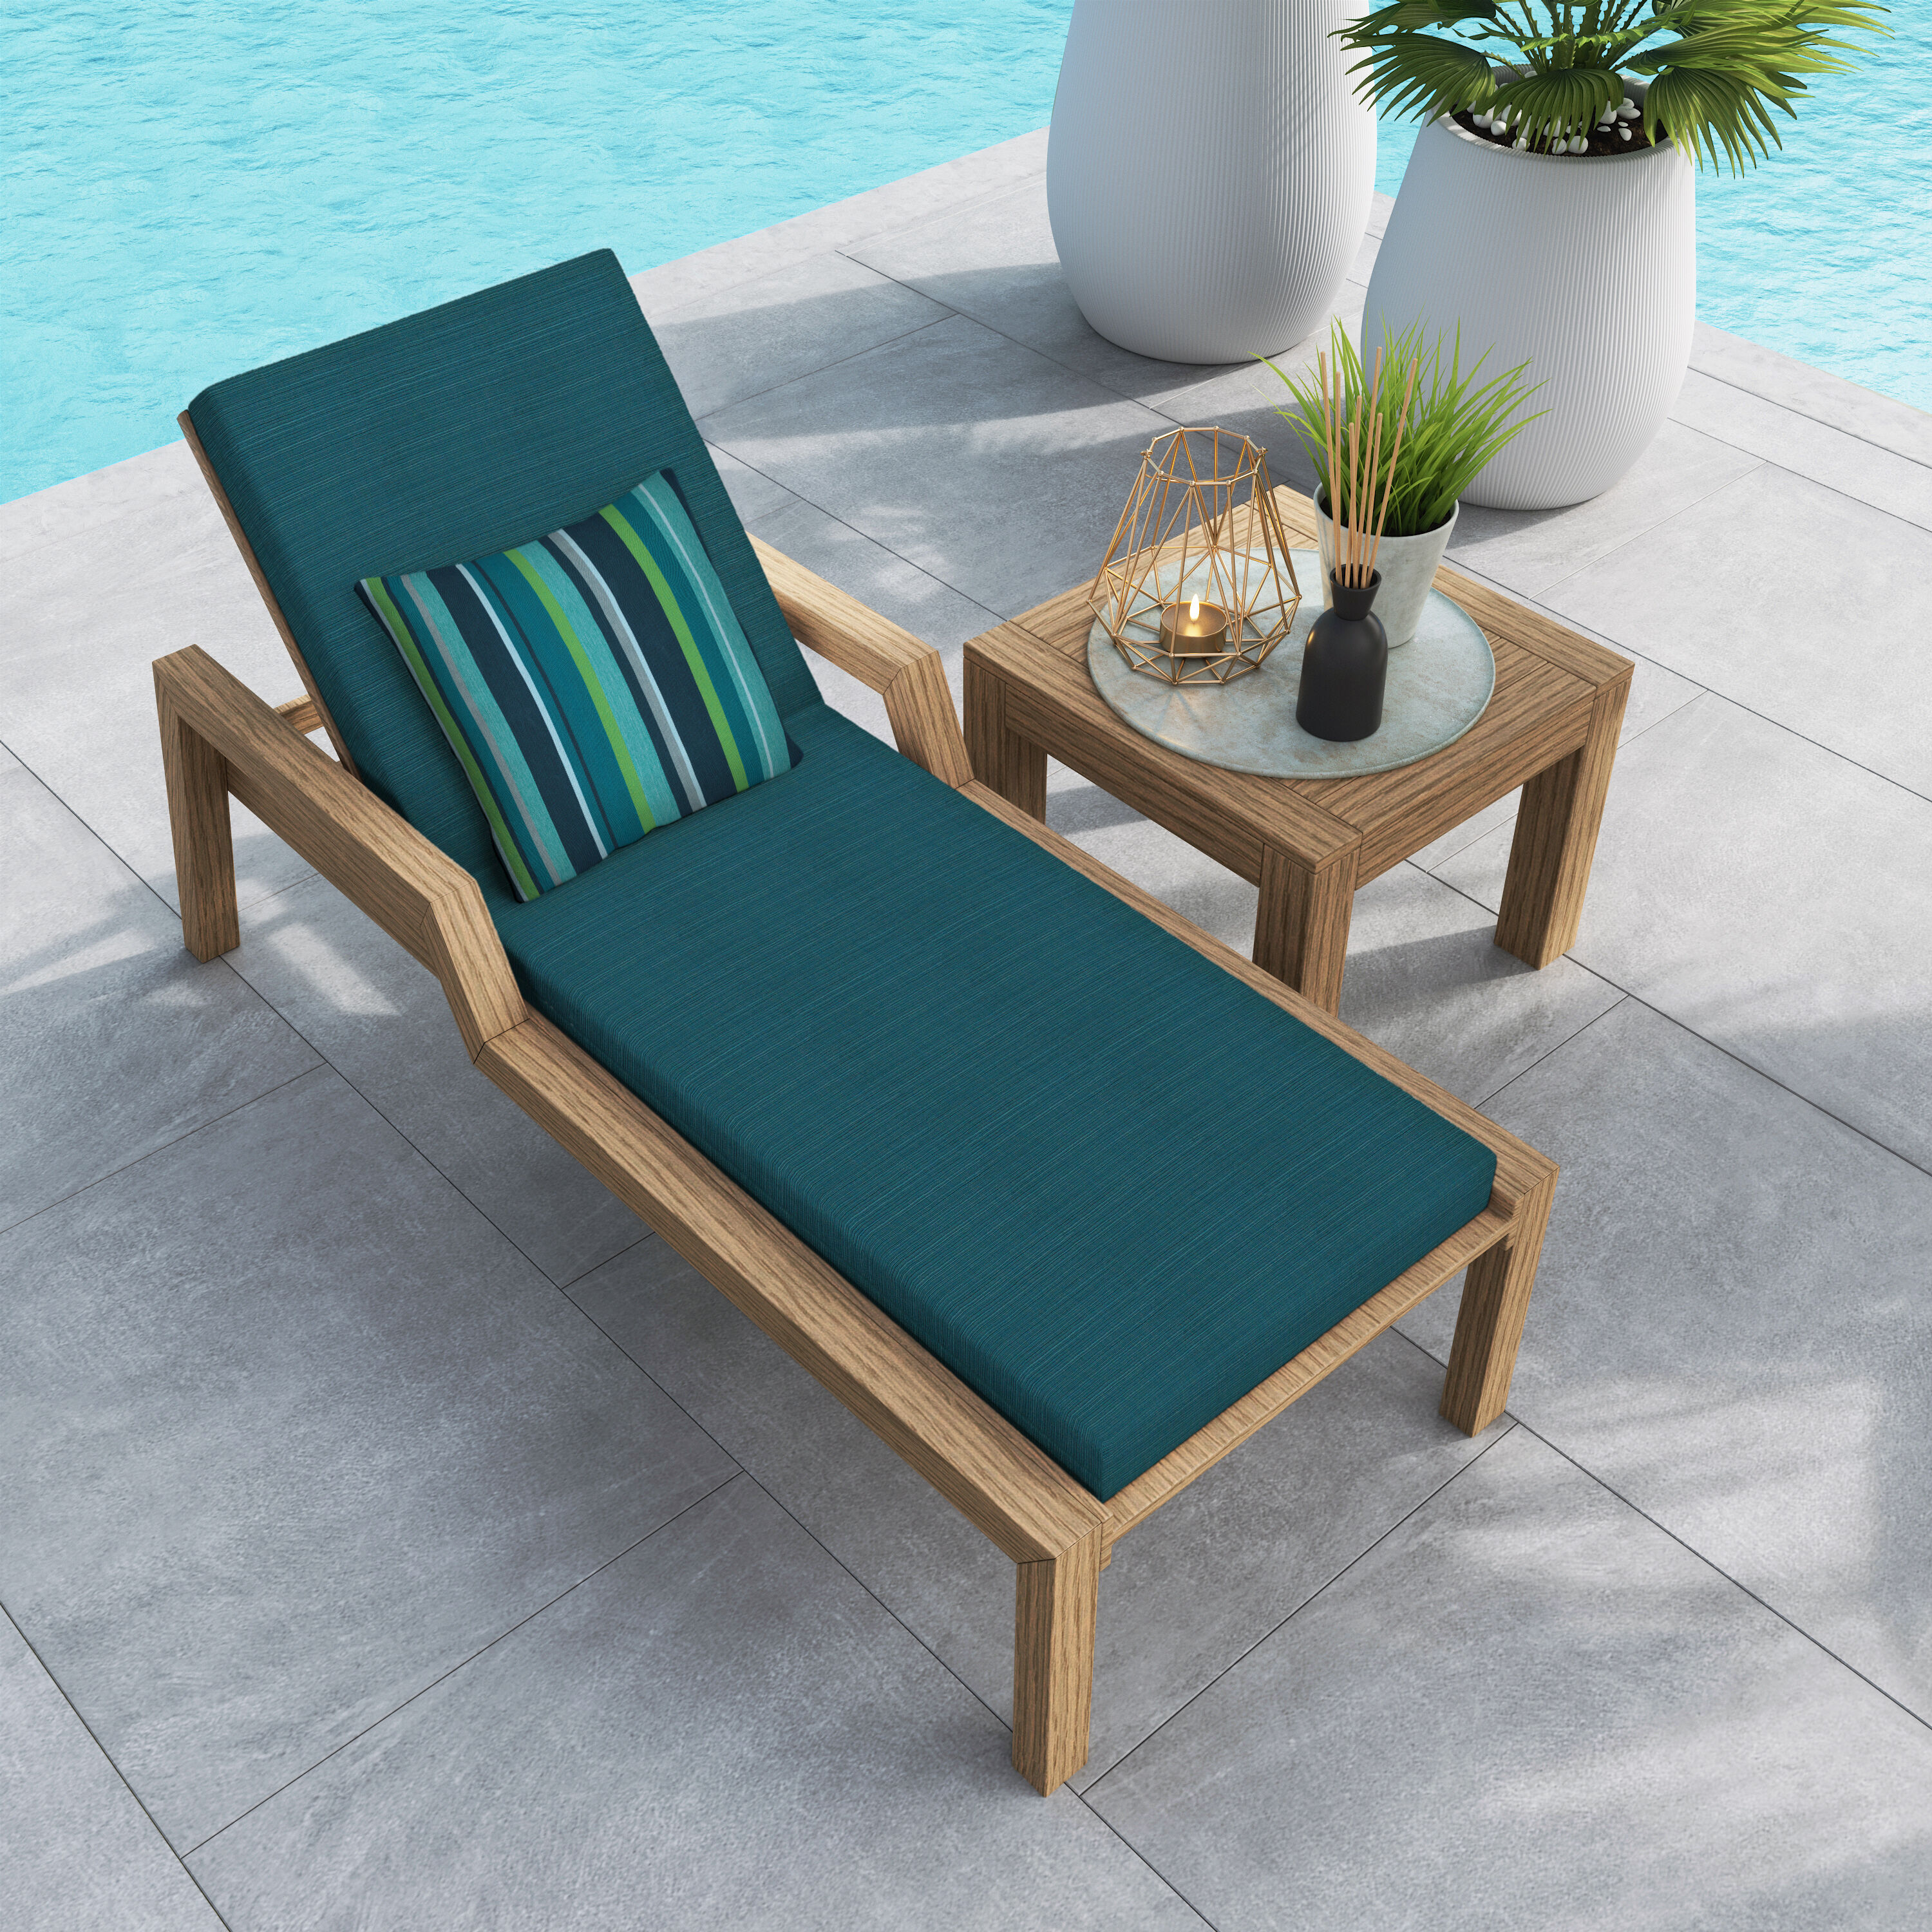 Sloane Outdoor Tapered Chair Cushion - Bed Bath & Beyond - 11420827